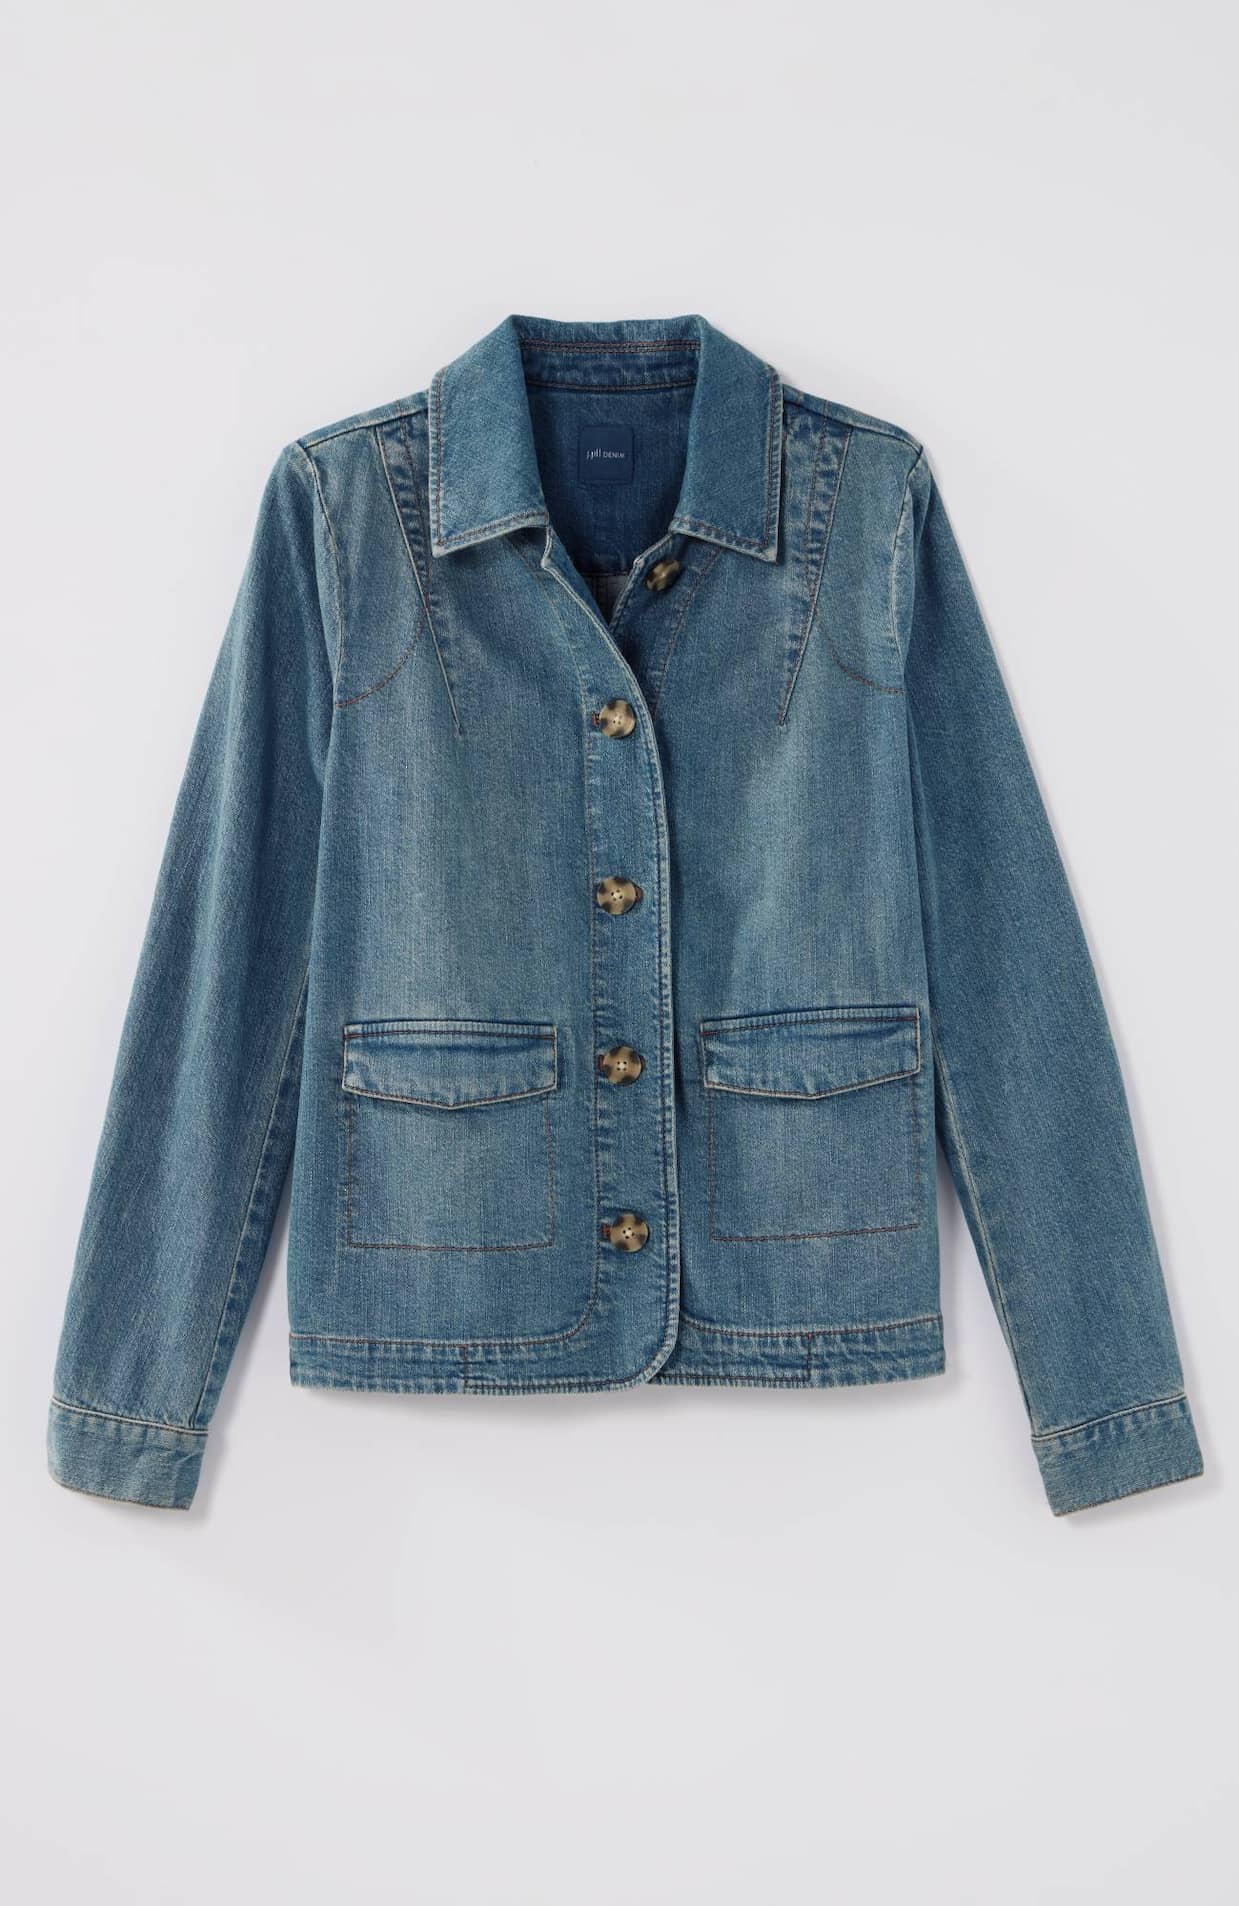 J Jill Lined Jean Denim Jacket Coat Womens Size Medium to Large, Women's  Fashion, Coats, Jackets and Outerwear on Carousell